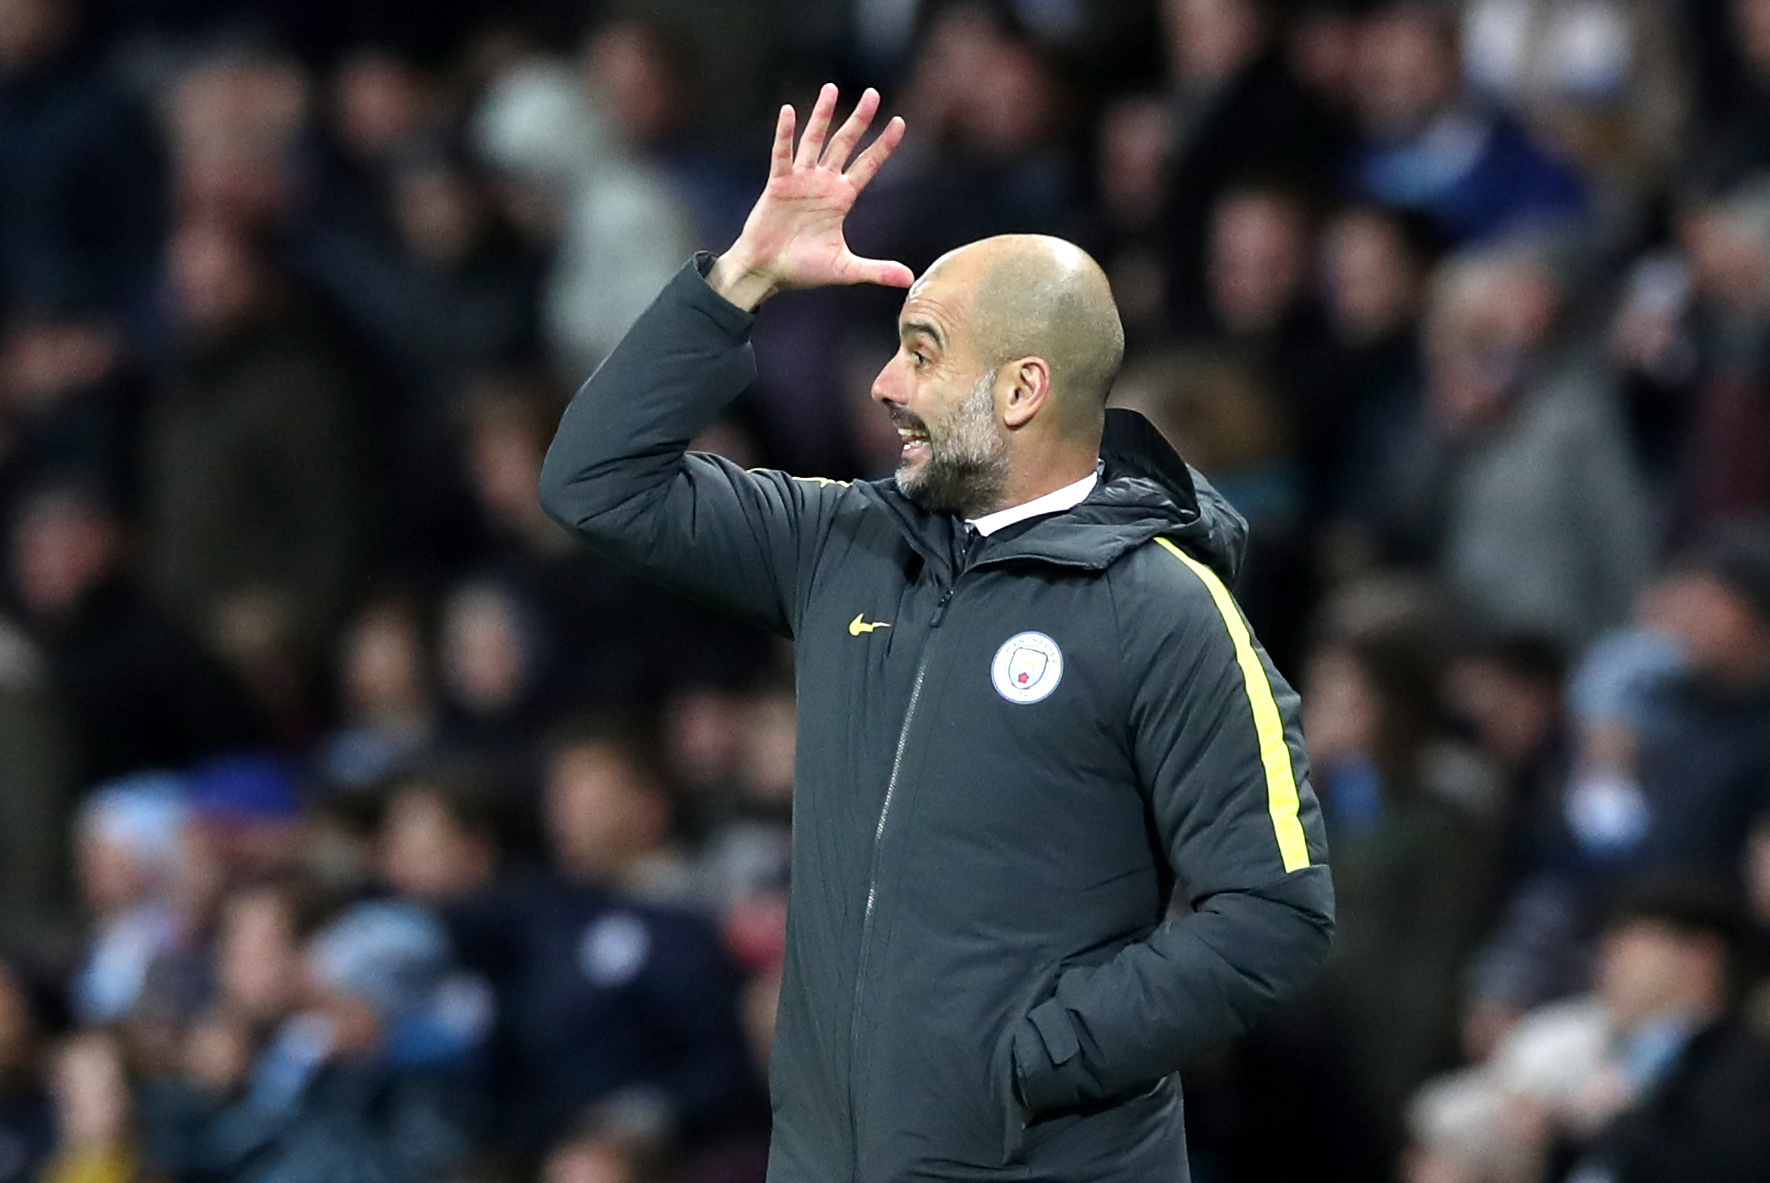 Manchester City's manager Pep Guardiola gestures on the touchline, during the English Premier League soccer match between Manchester City and Burnley, at the Etihad Stadium, in Manchester, England, Monday, Jan. 2, 2017. AP